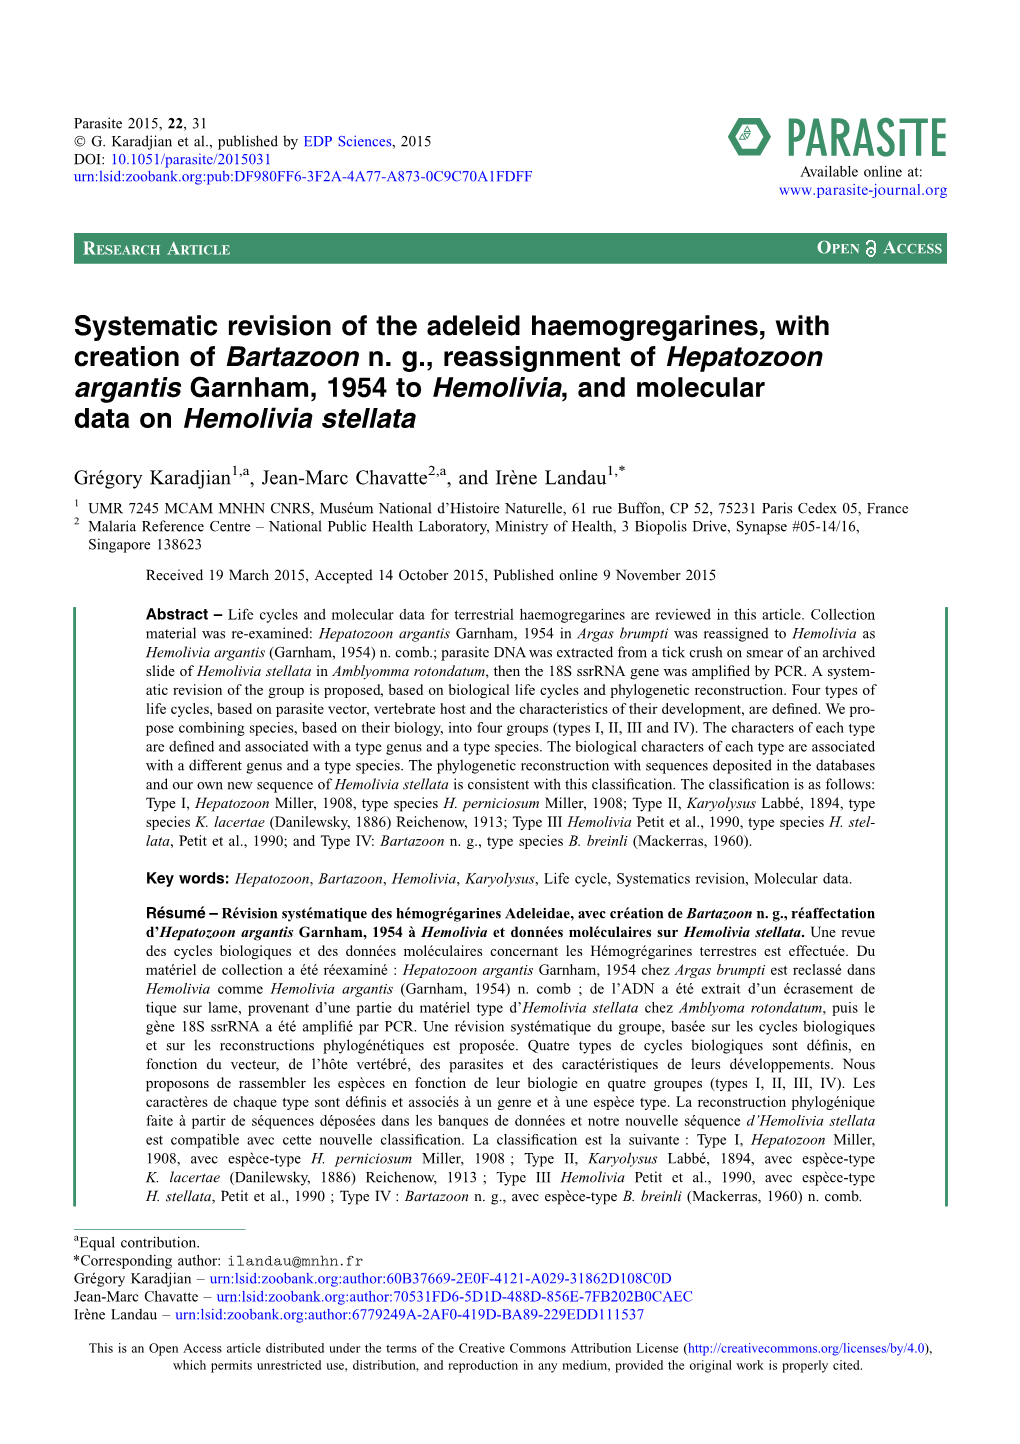 Systematic Revision of the Adeleid Haemogregarines, with Creation of Bartazoon N